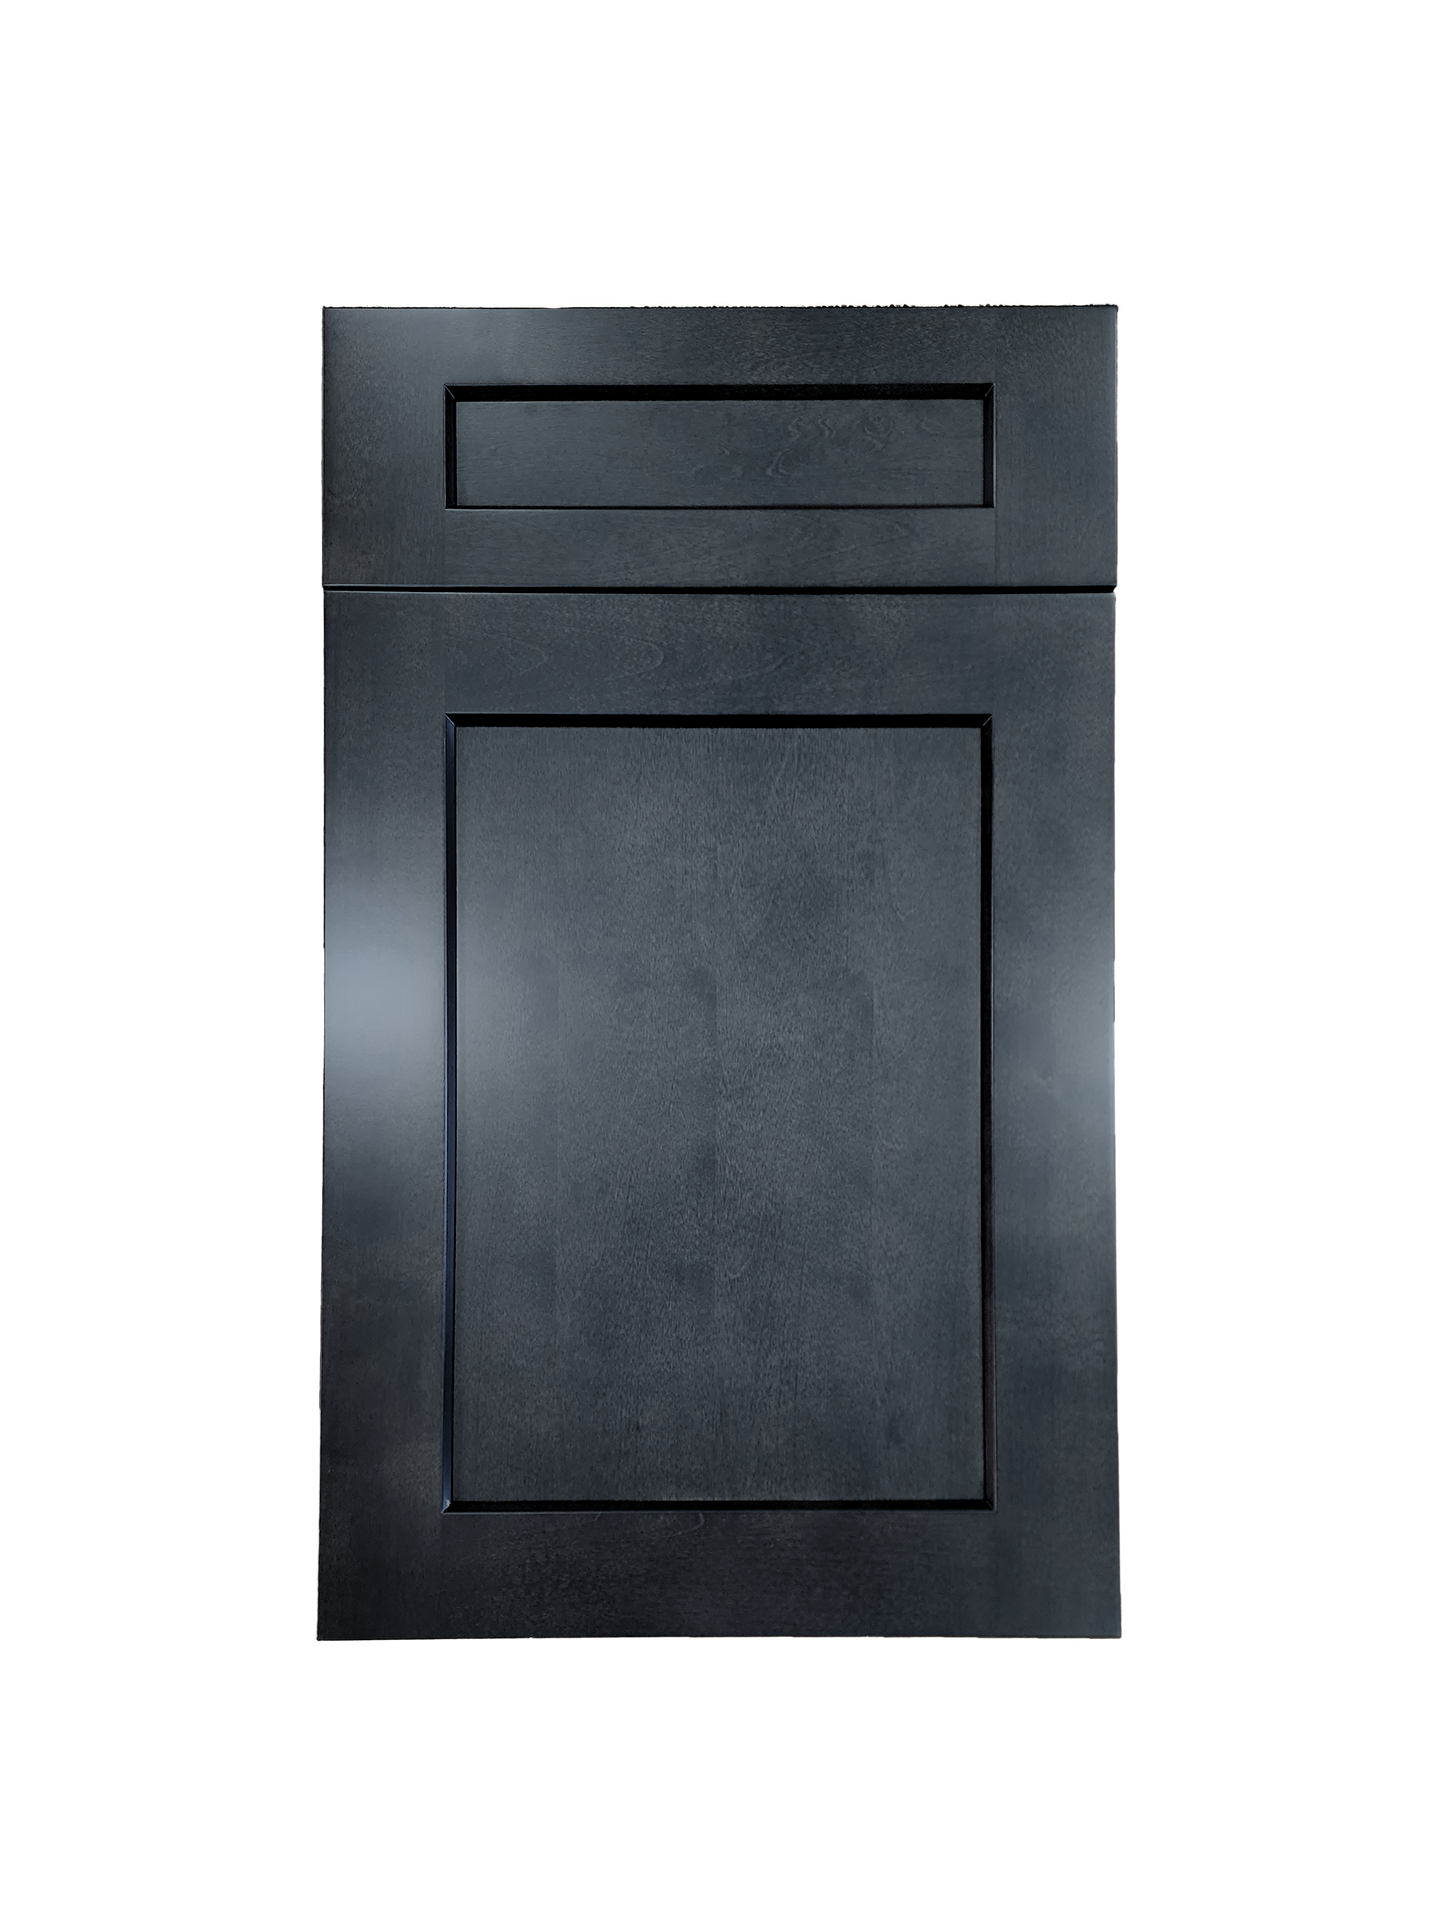 Stormy Grey Wall Cabinet 24 inches wide 12 inches deep 36 inches tall with Stormy Grey box and Stormy Grey doors